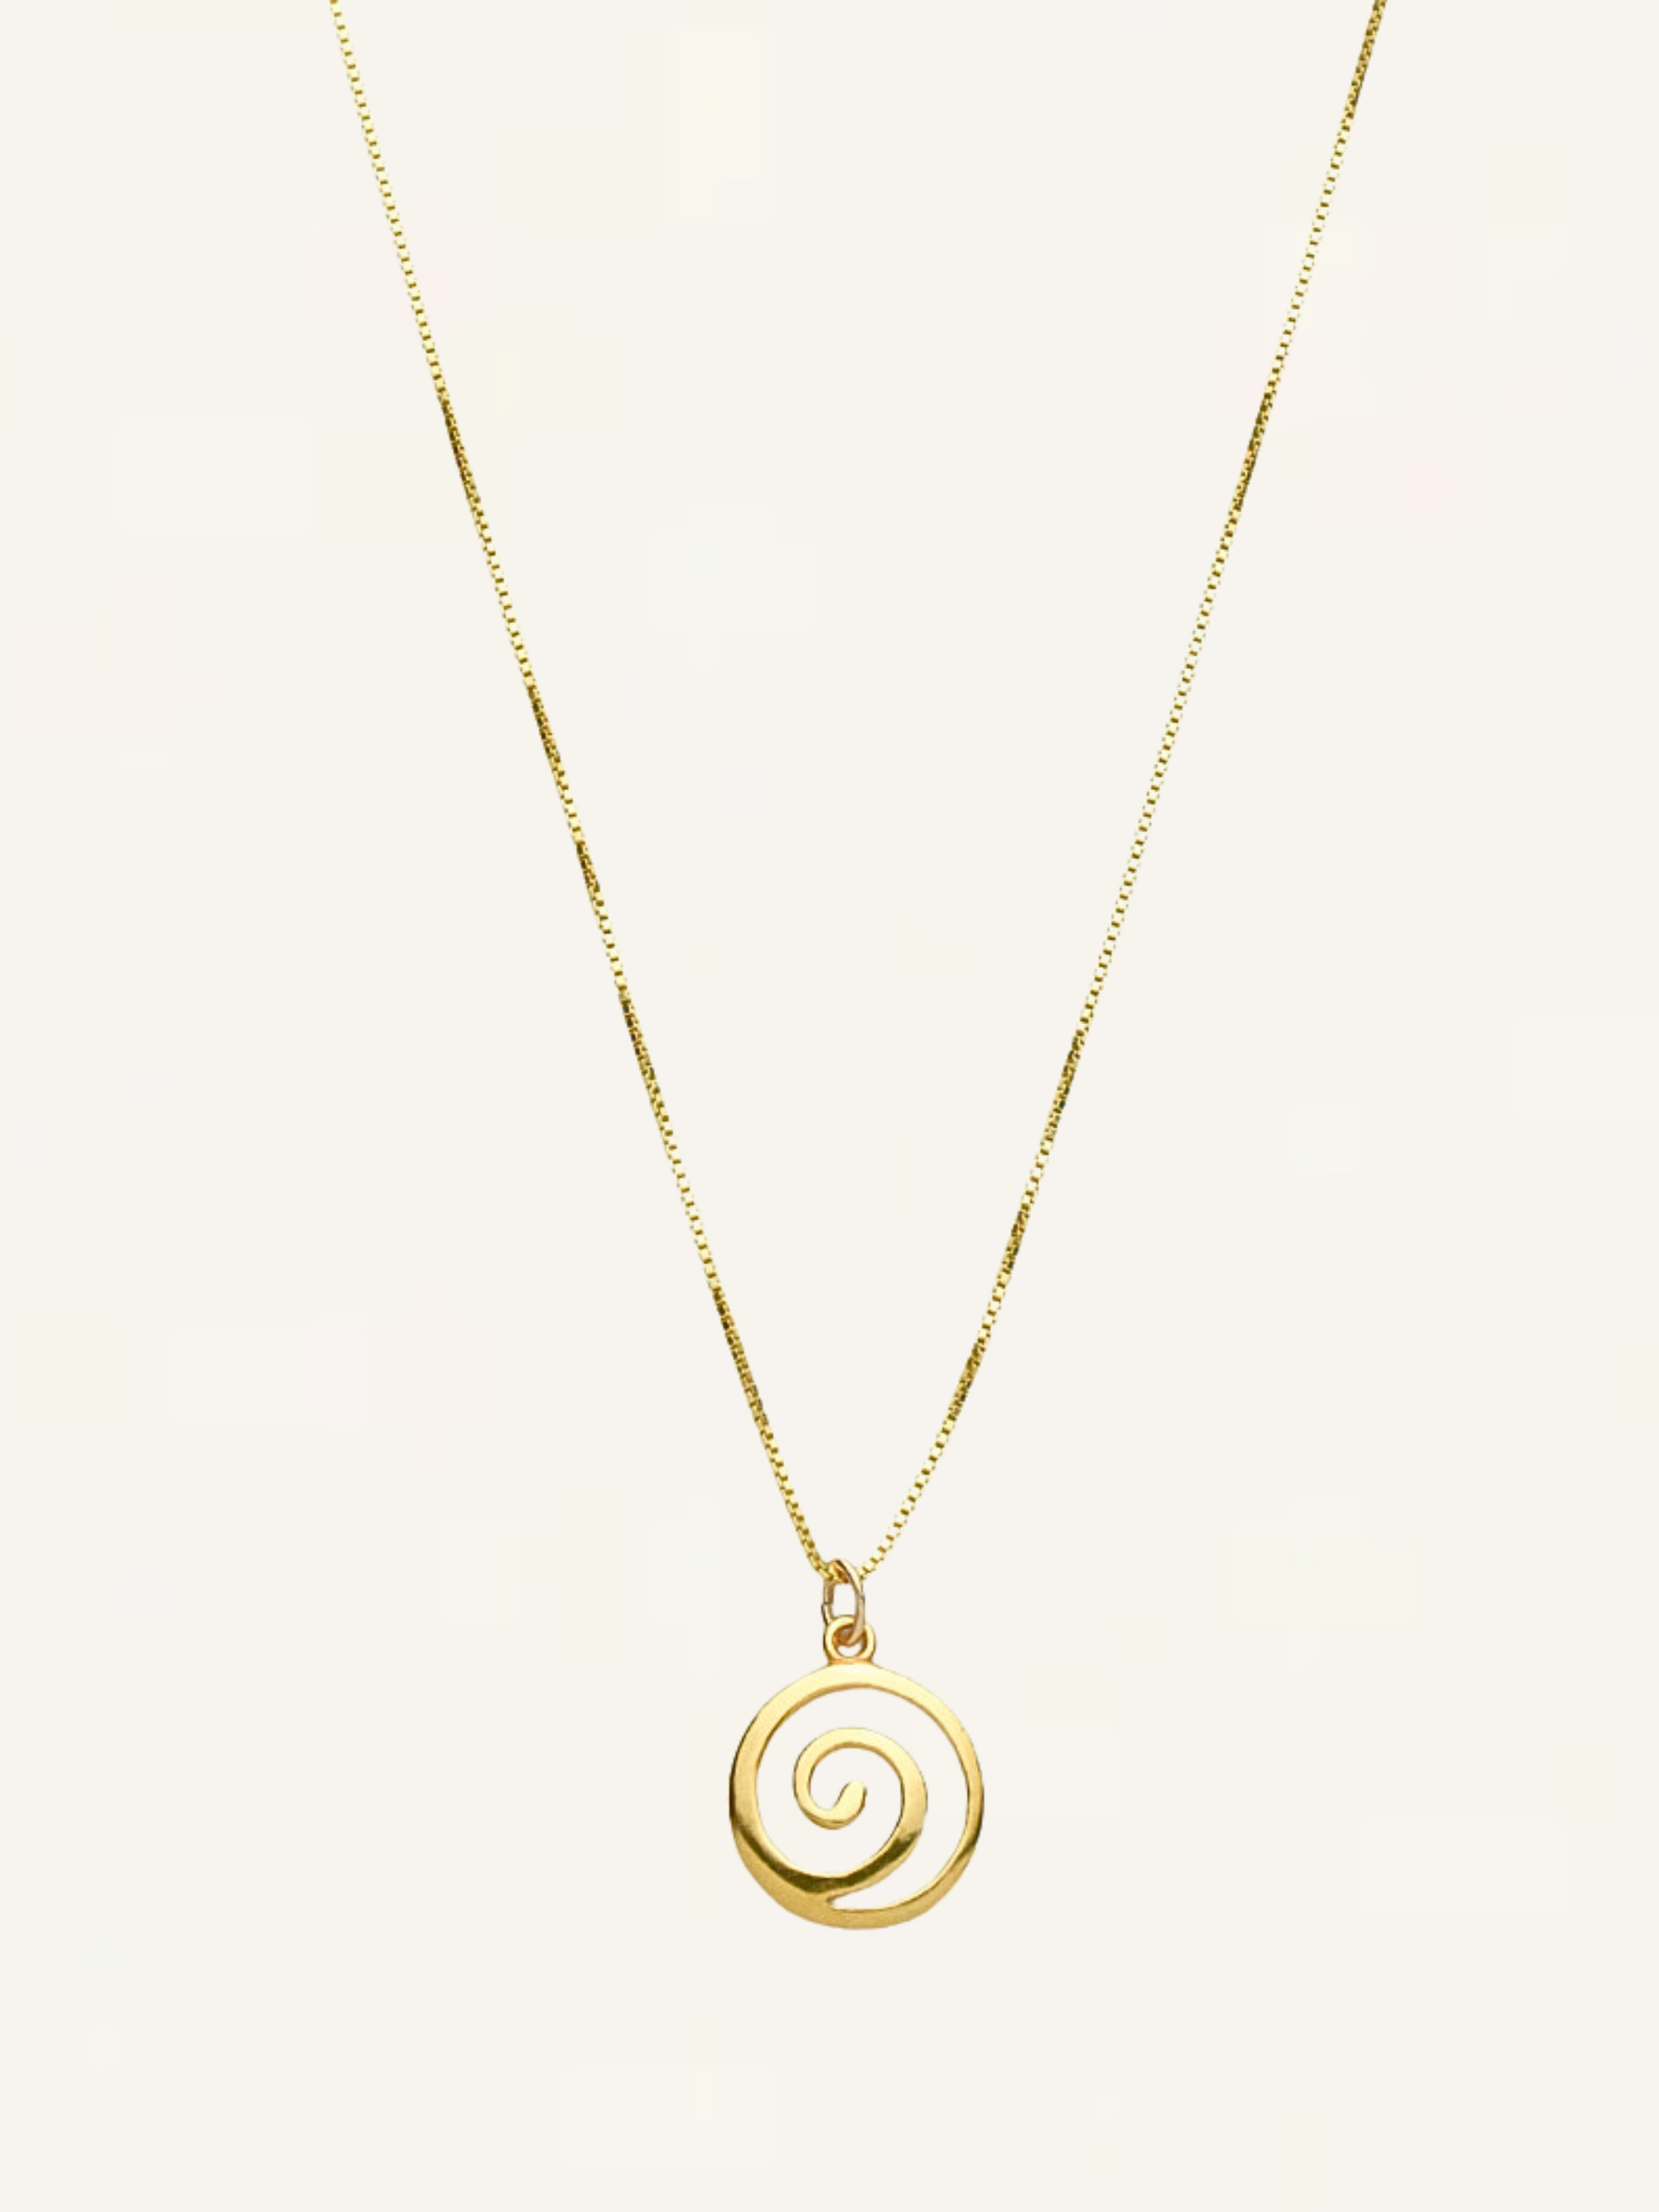 Spiral Charm Necklace